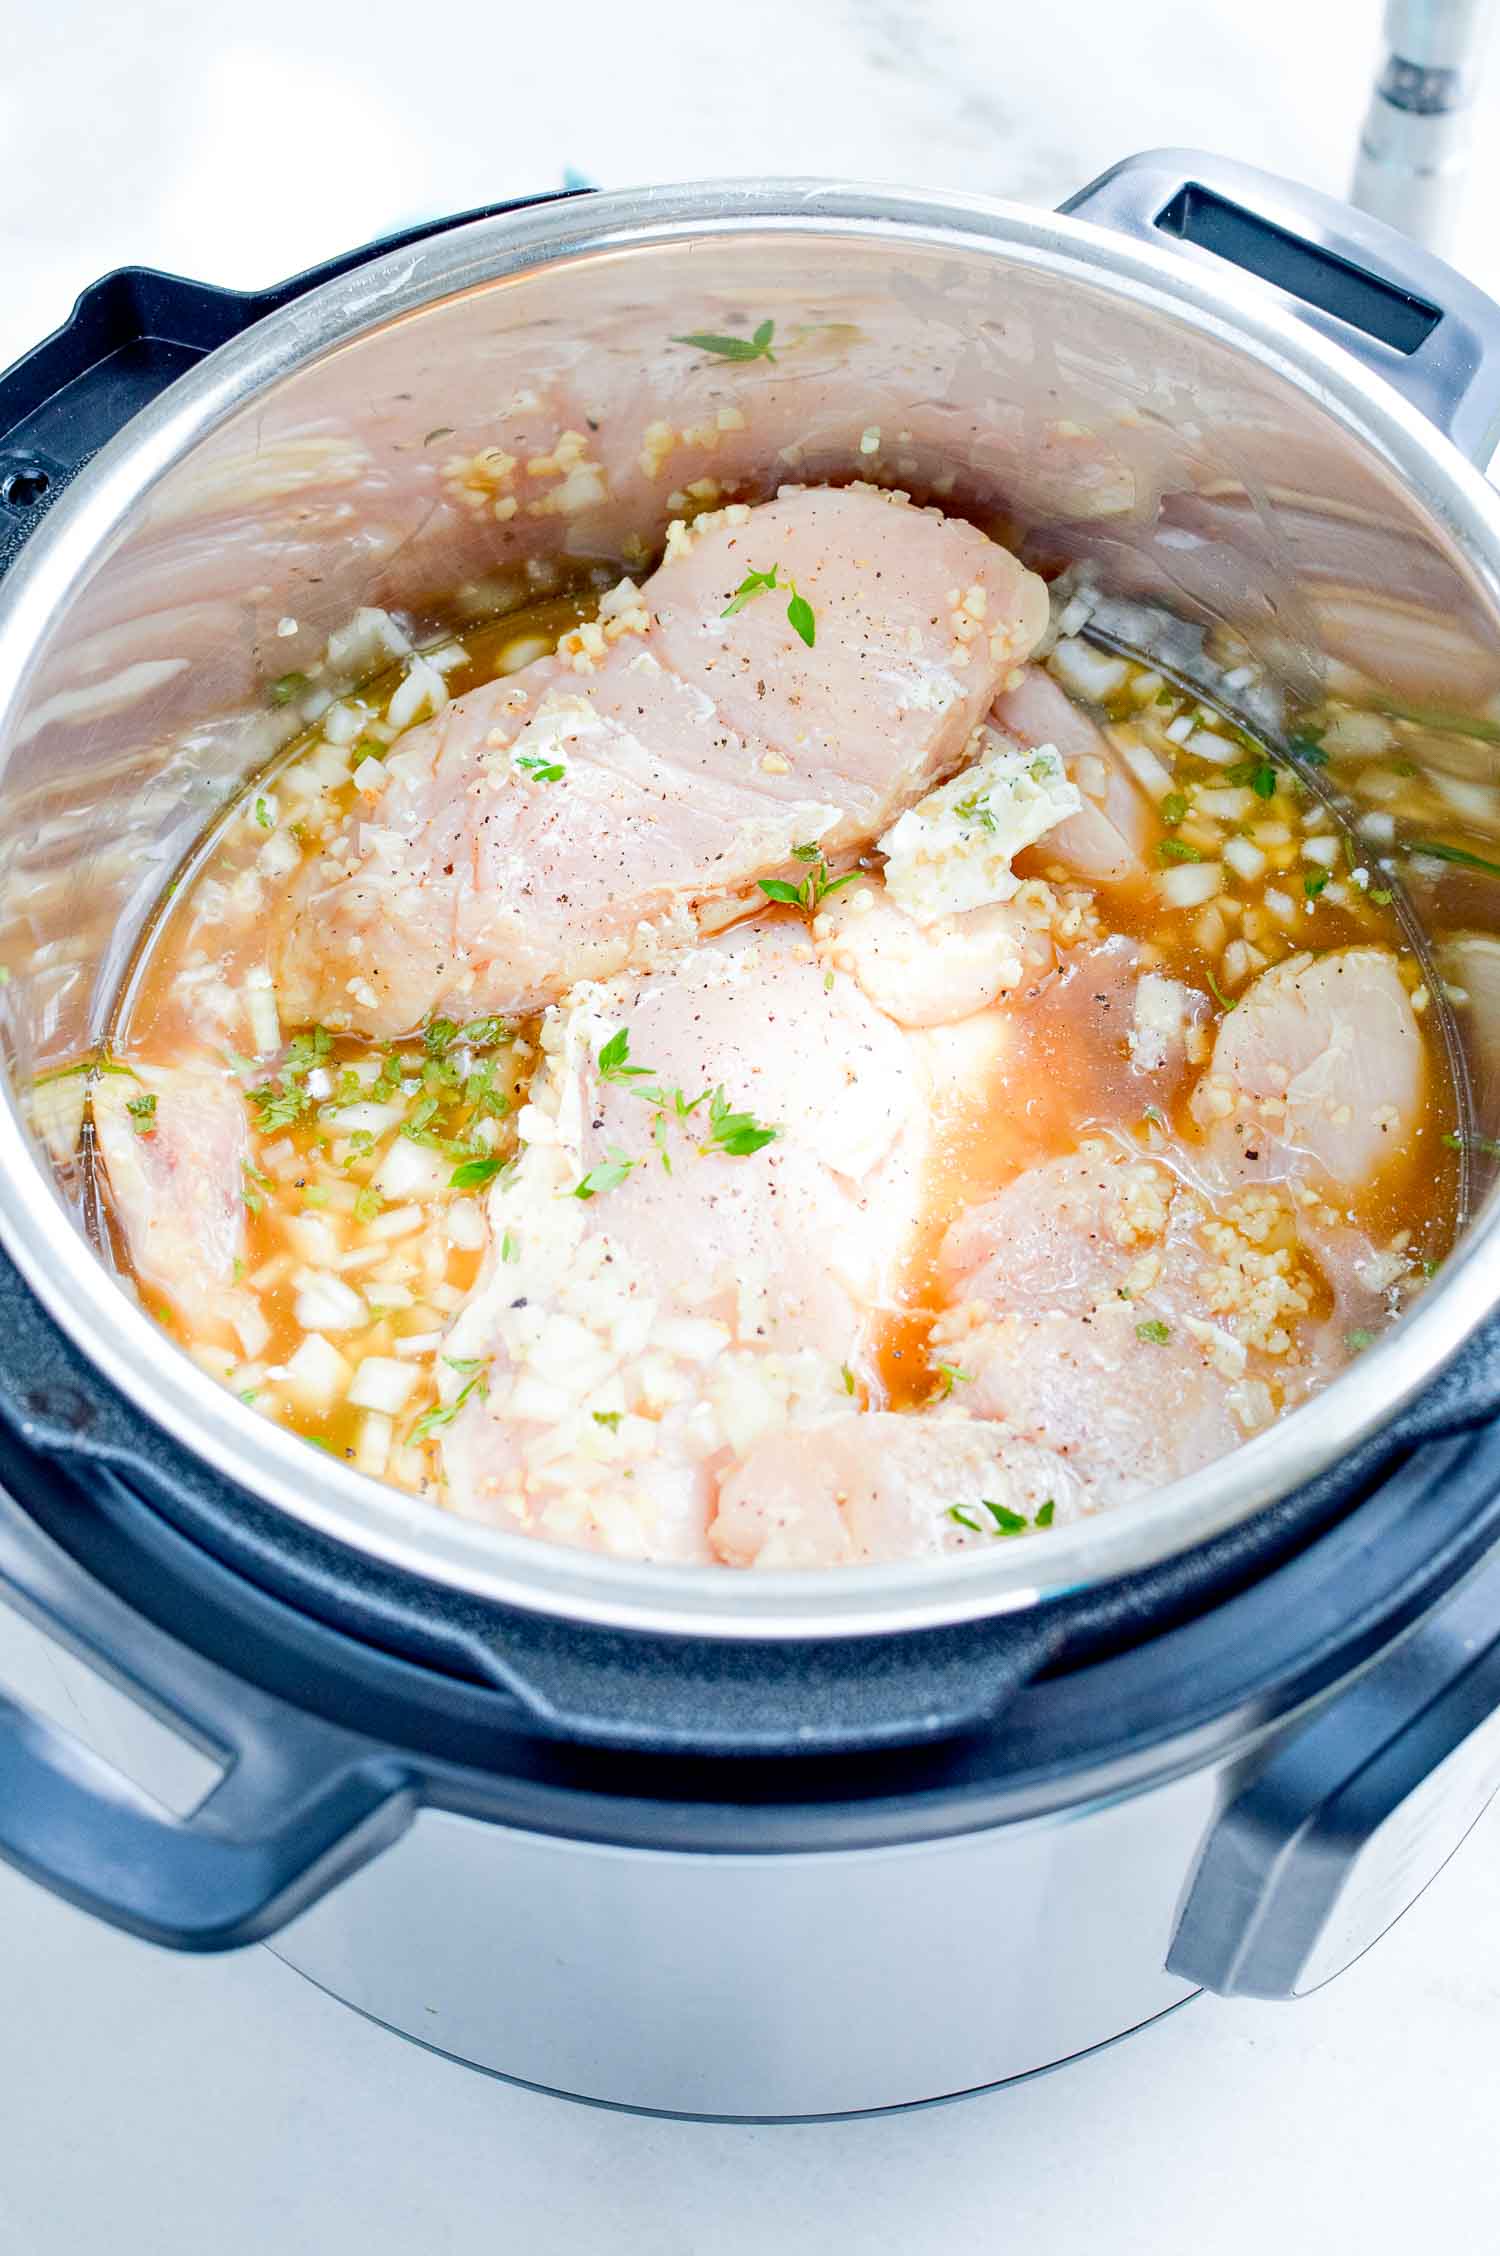 An instant pot with ingredients with chicken, veggies and herbs with stock filling the pot.